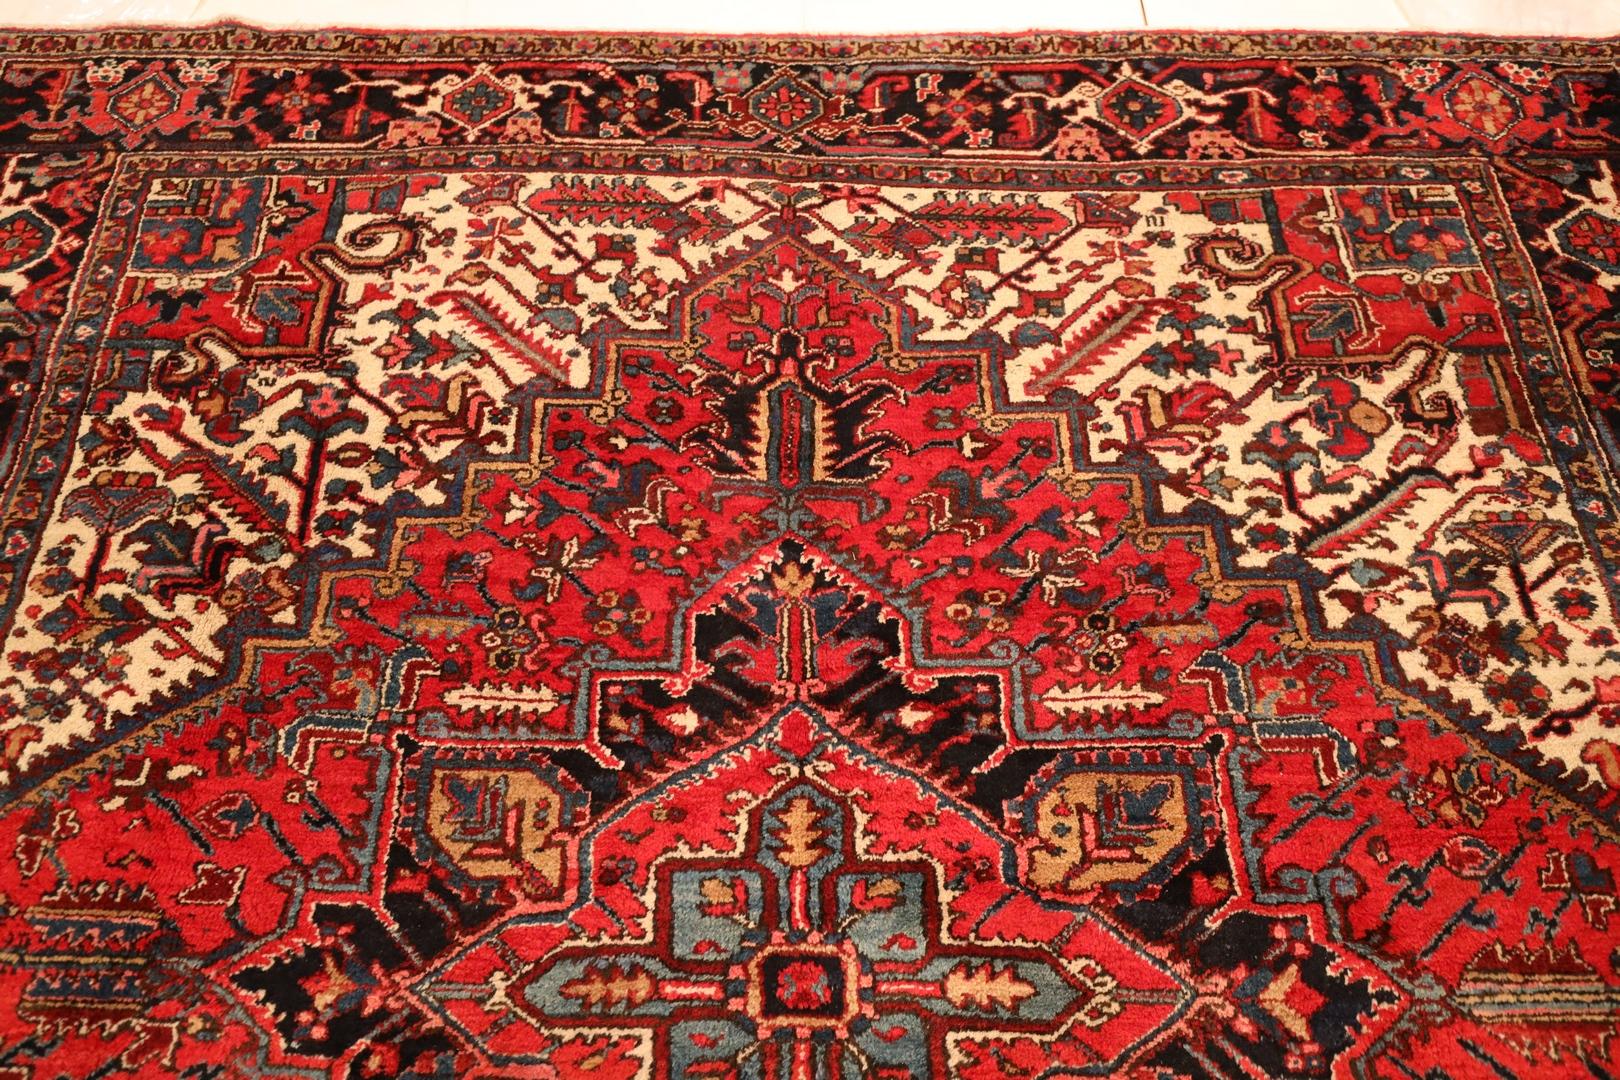 Hand-Knotted Heriz Semi-Antique Rug - 8'0